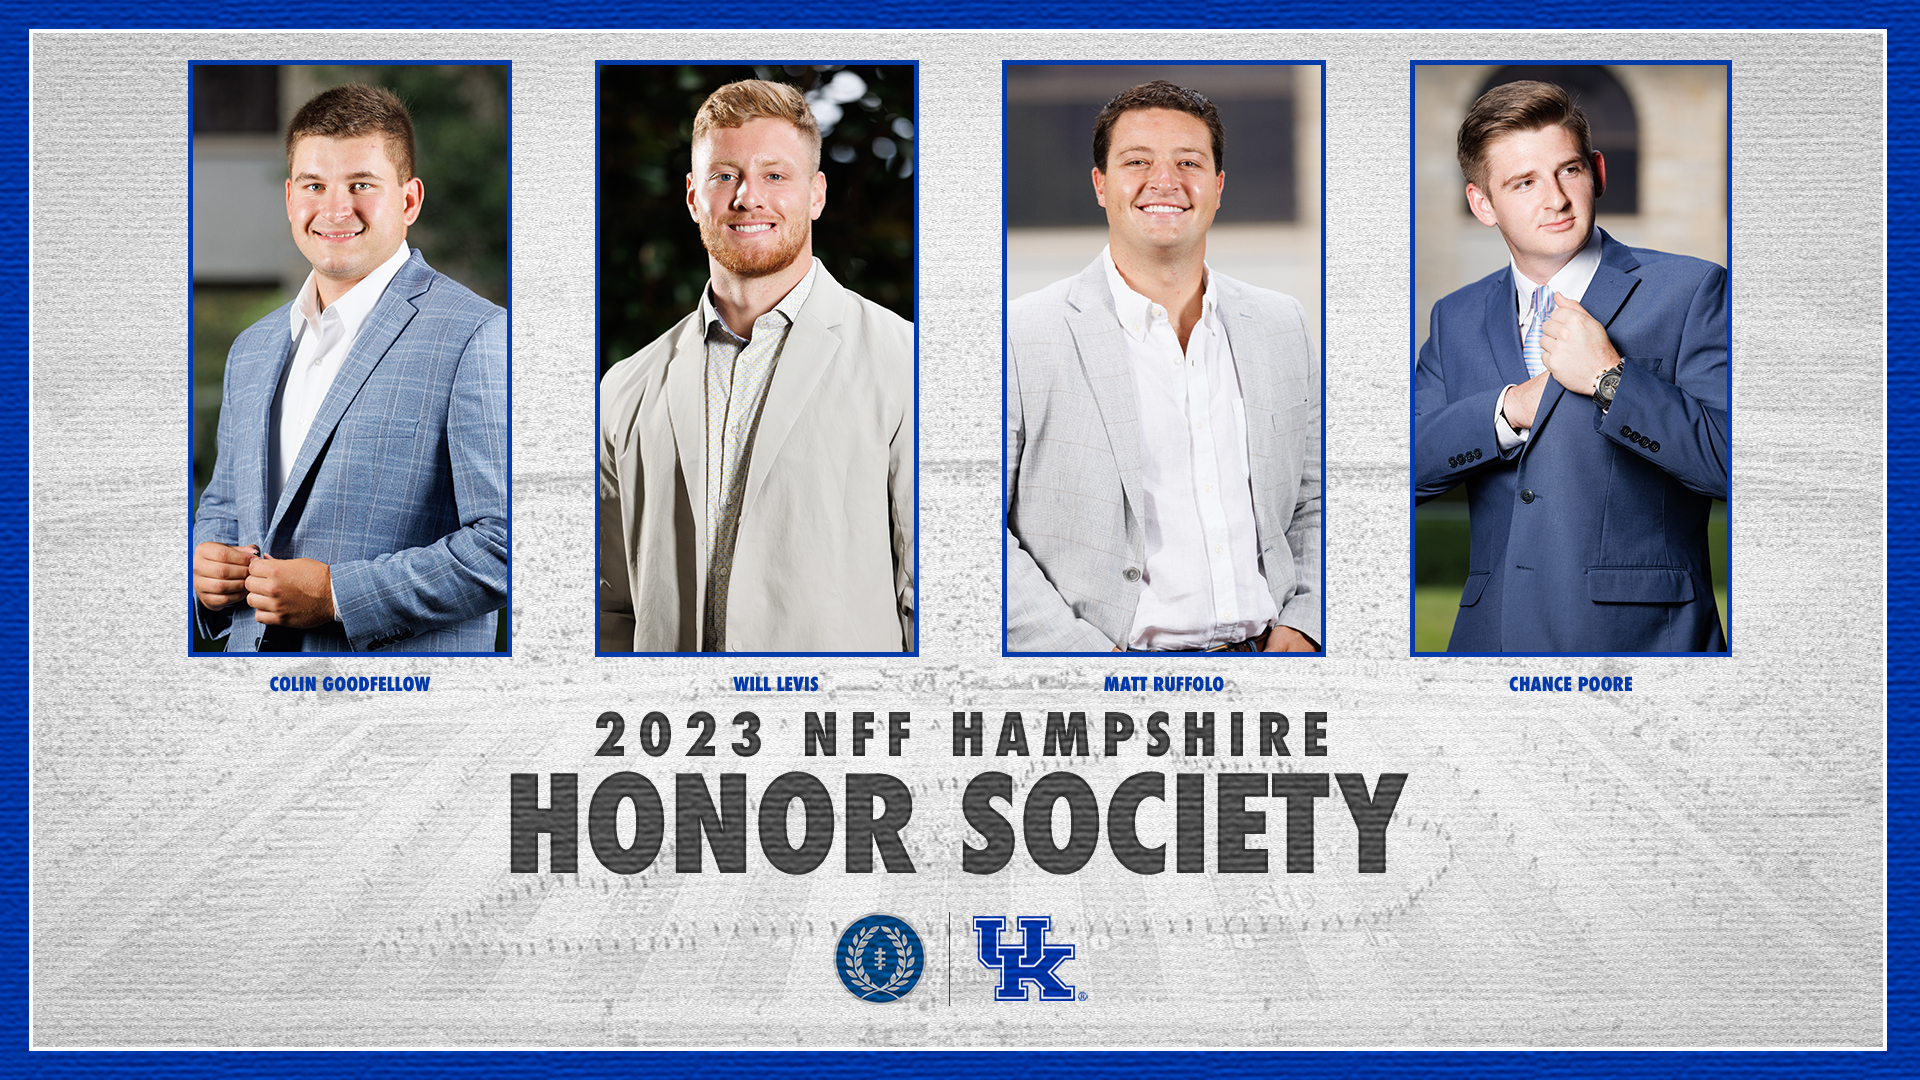 Four Wildcats Named to NFF Hampshire Honor Society